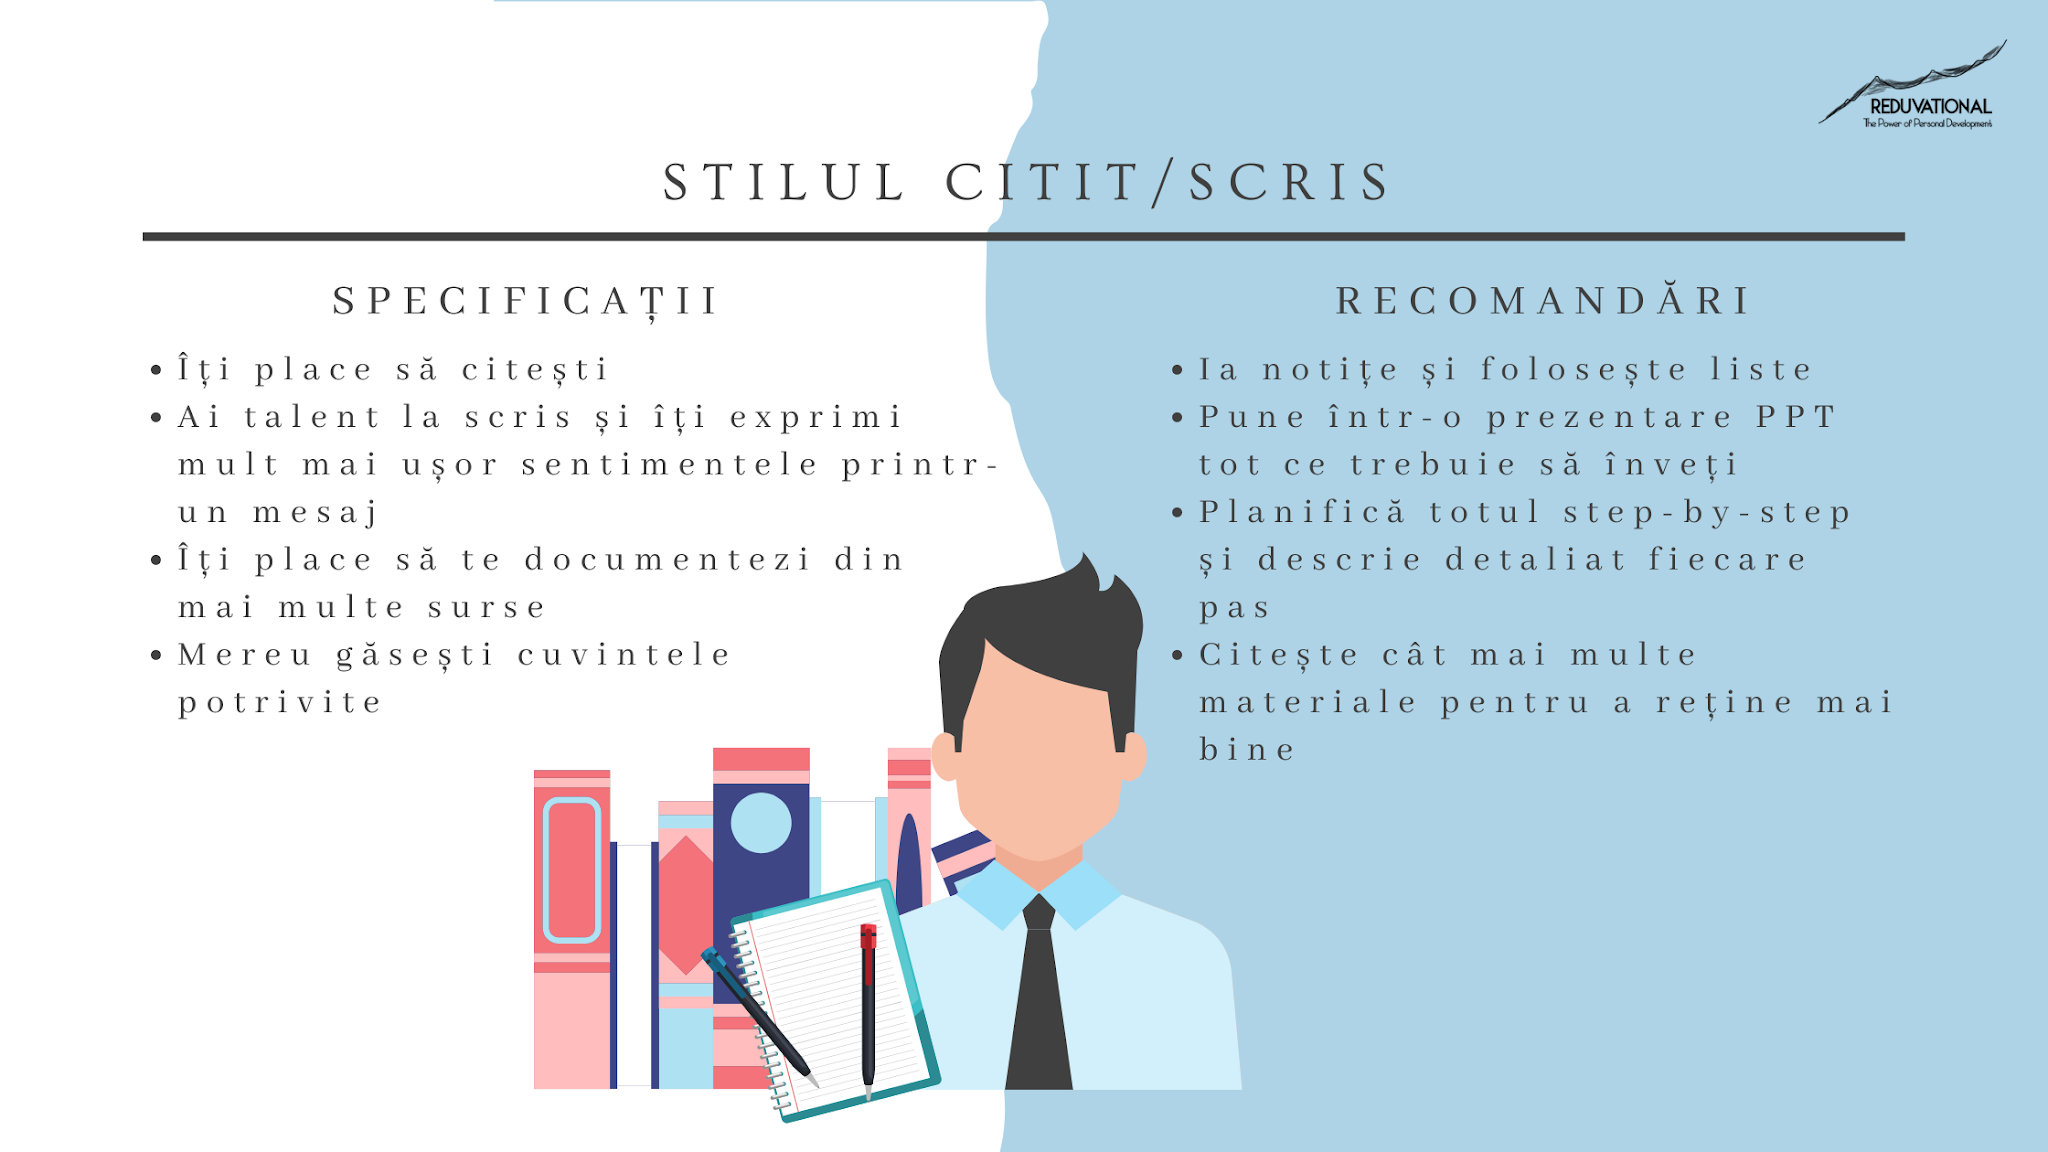 Stilul Citit/Scris - Specificatii si Tips and Tricks